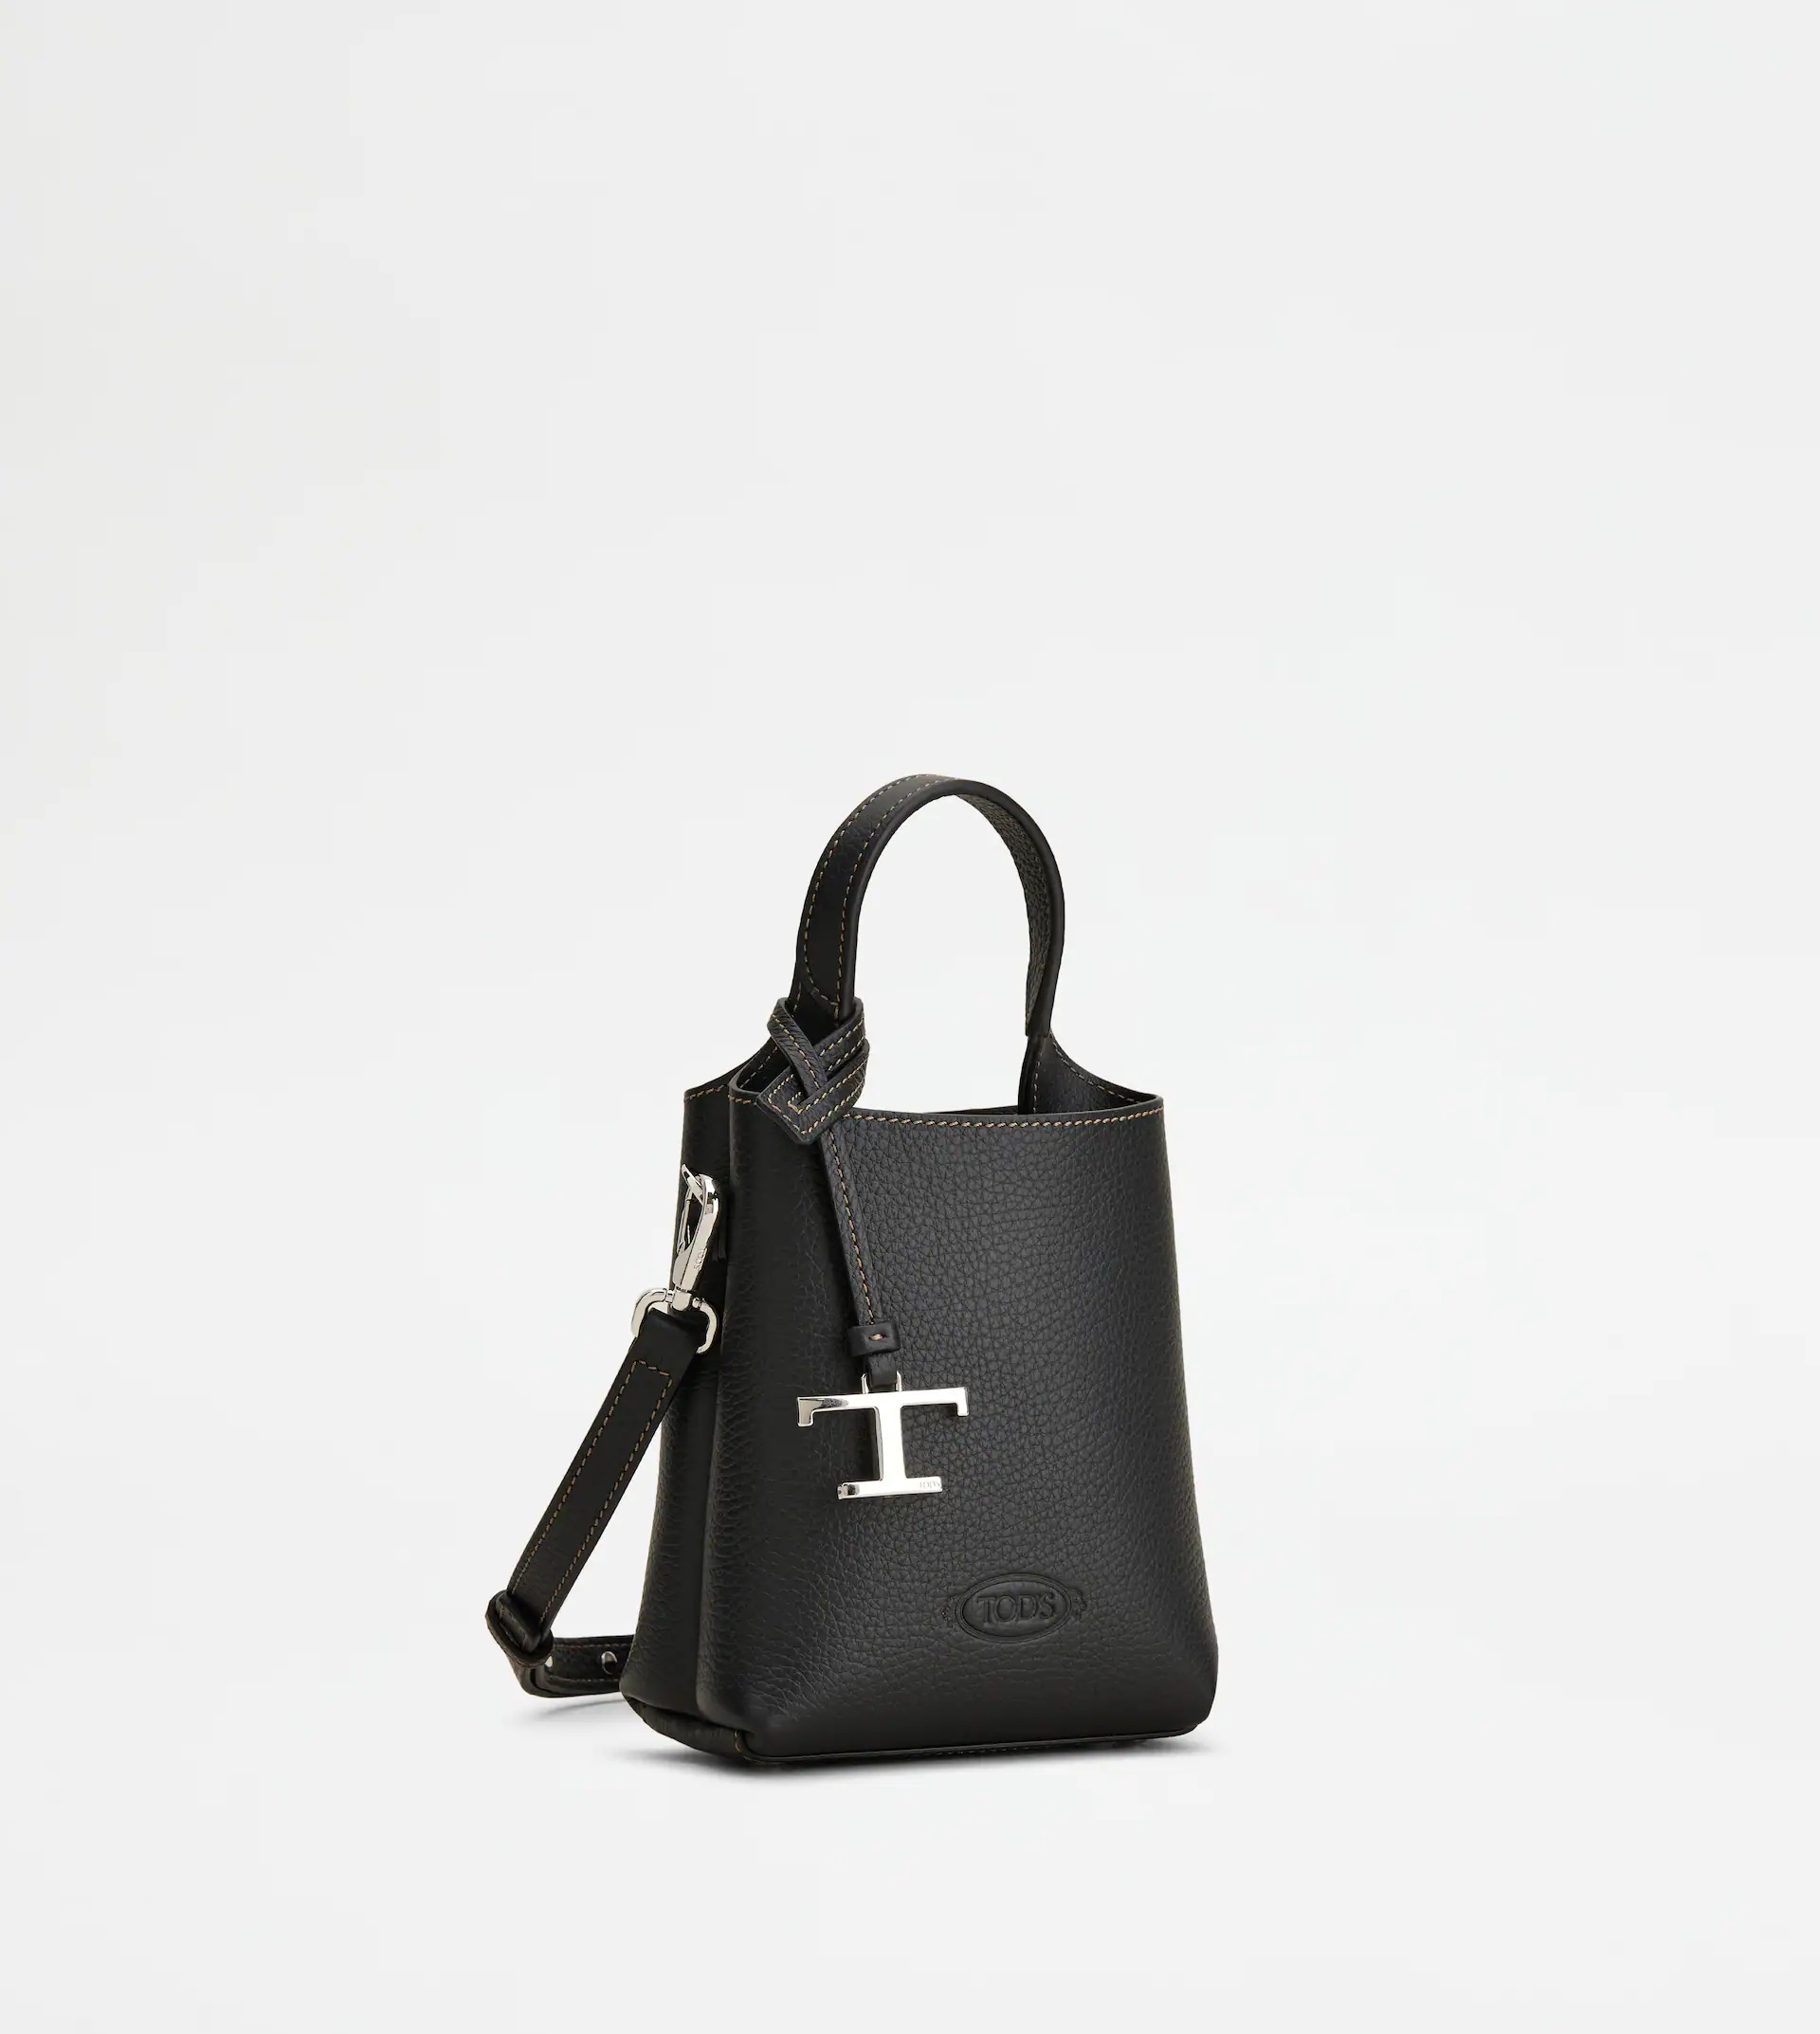 TOD'S MICRO BAG IN LEATHER - BLACK - 2